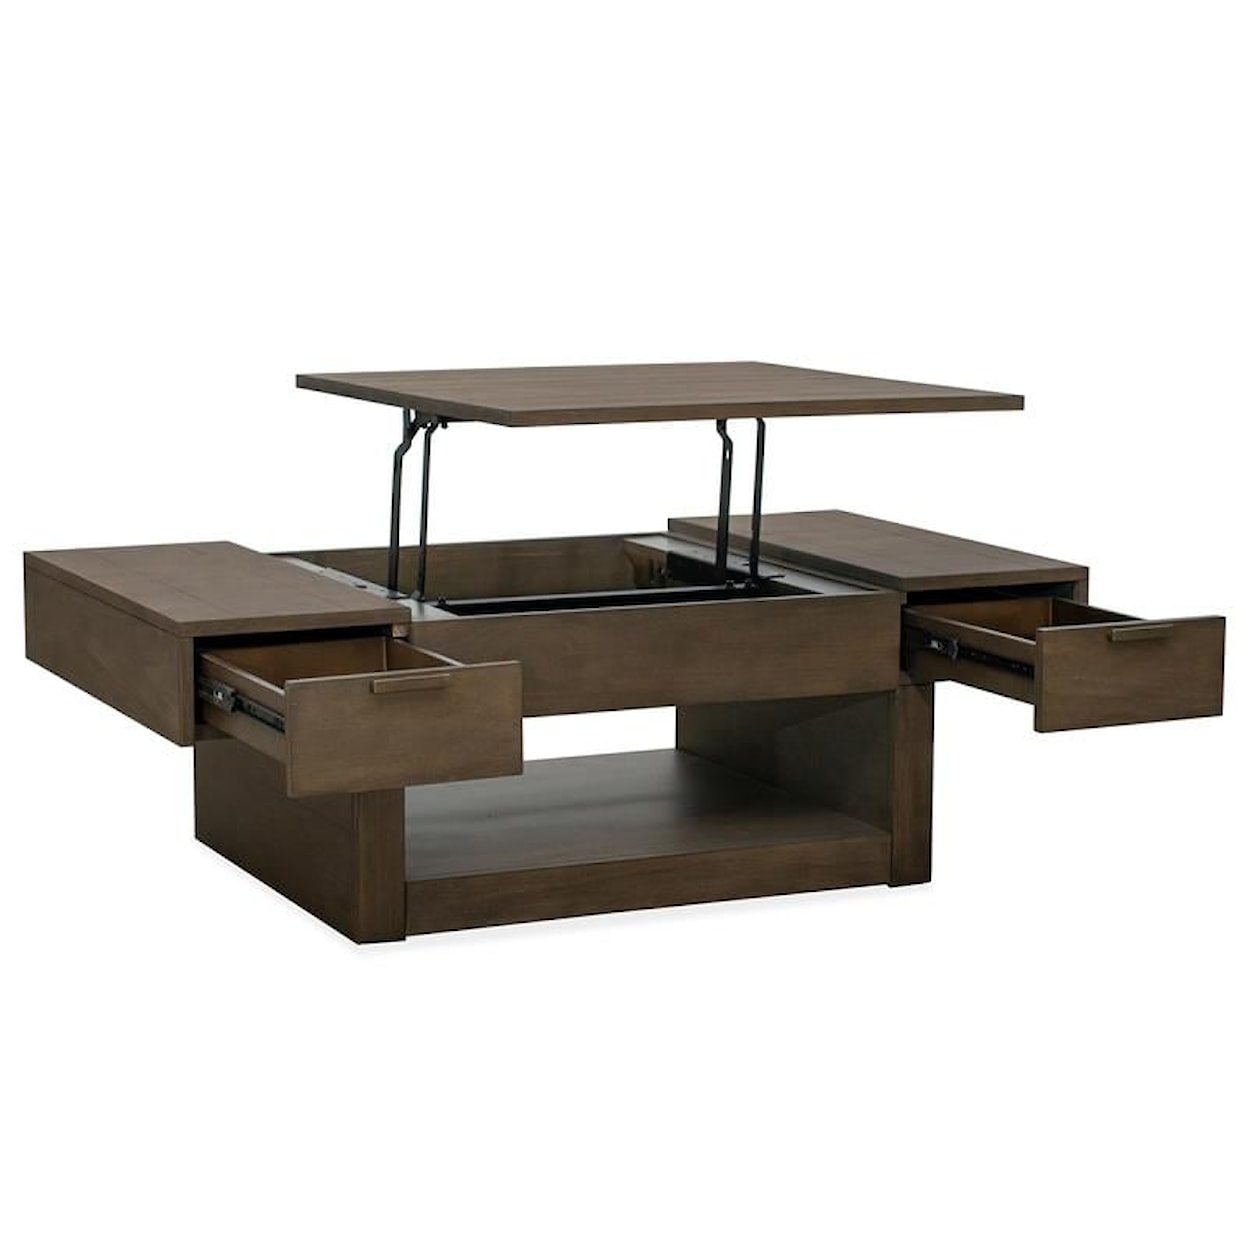 Magnussen Home McGrath Occasional Tables Lift-Top Cocktail Table